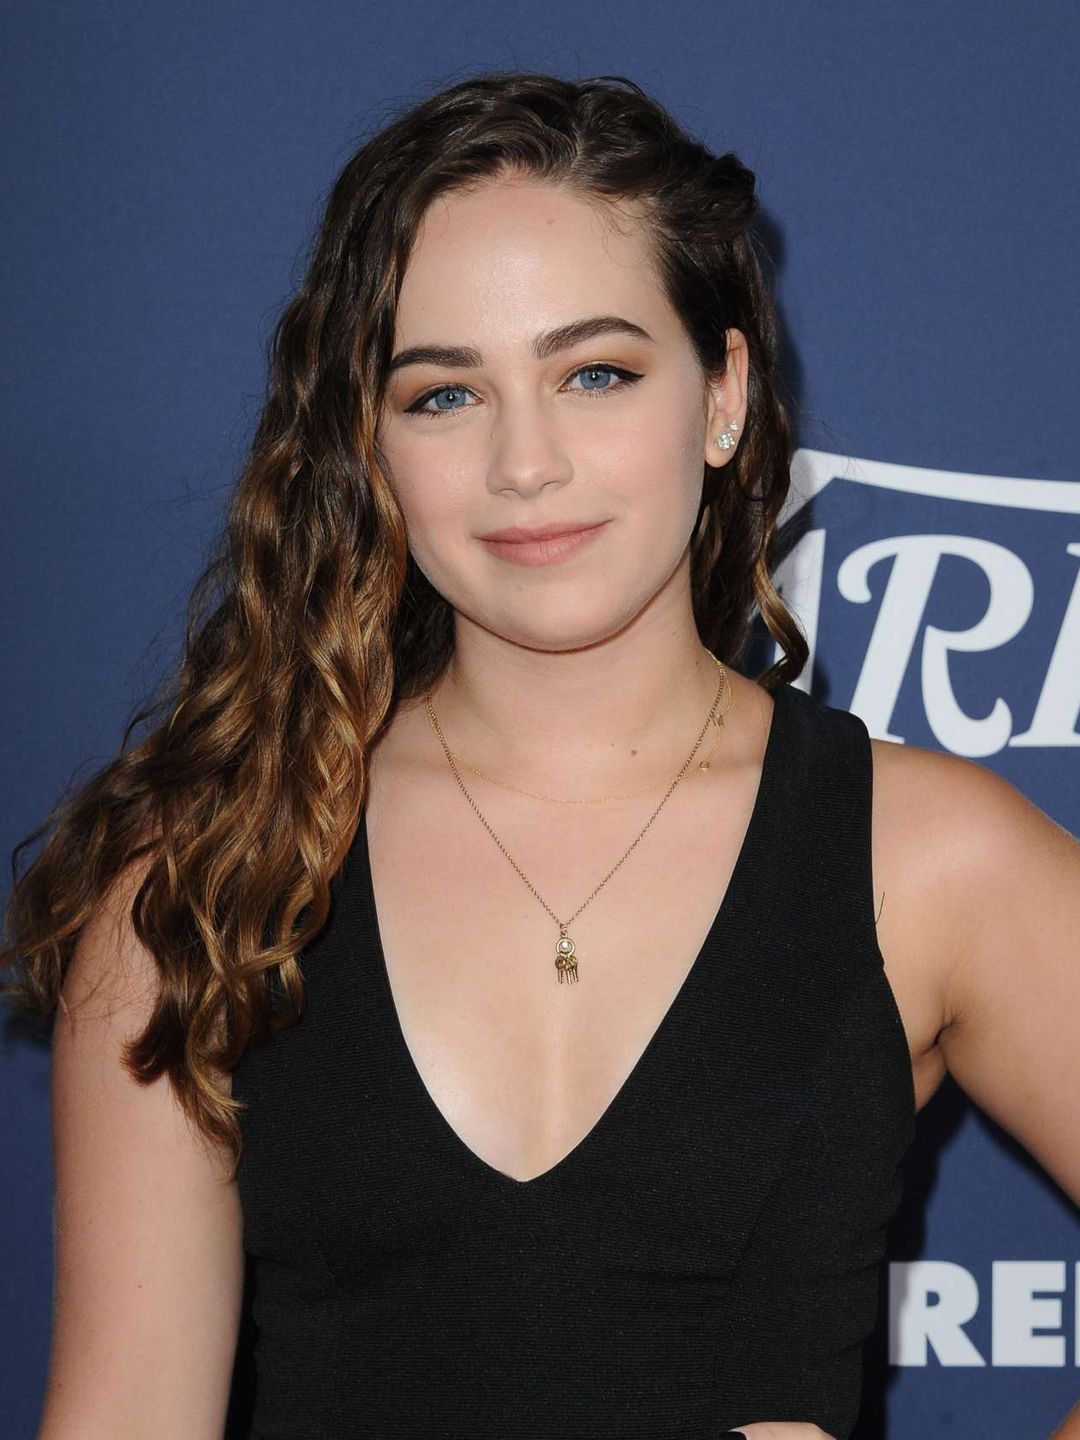 Mary Mouser who is she